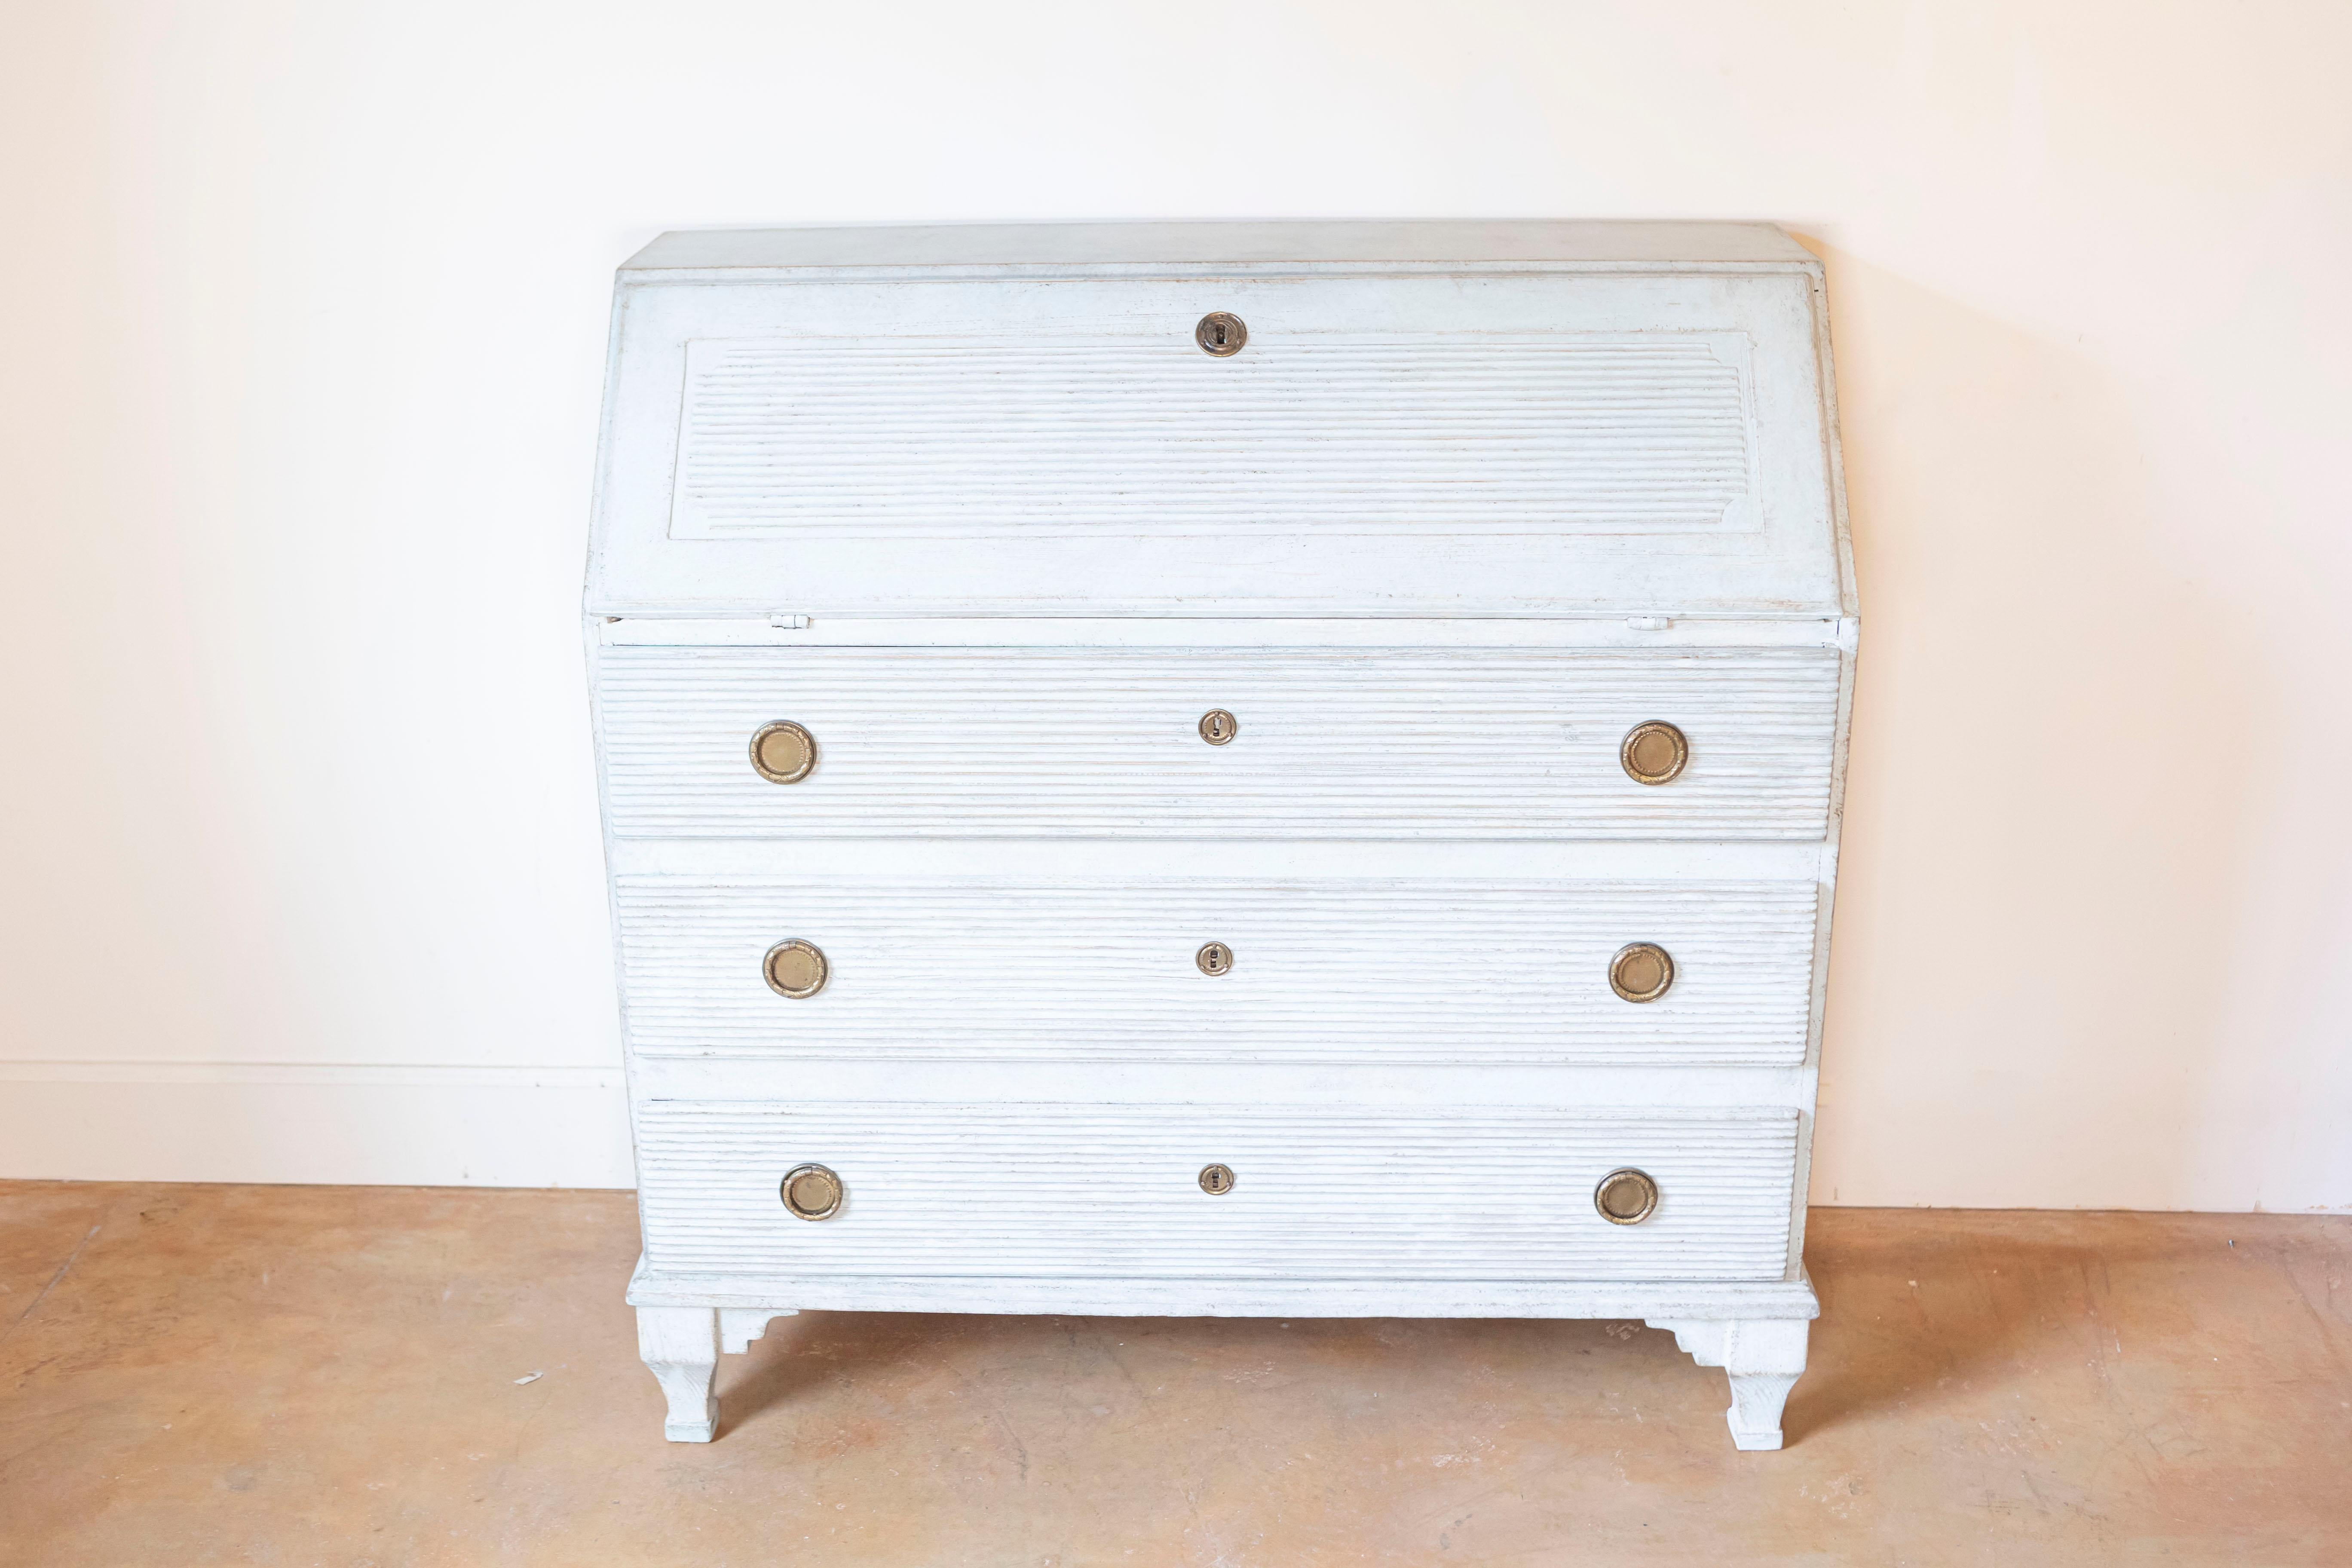 A Swedish Gustavian style painted wood secretary circa 1820 with slant front desk, carved fluted motifs, three drawers and carved feet. Transport yourself to the elegant Swedish Gustavian style with this charming painted wood secretary from the